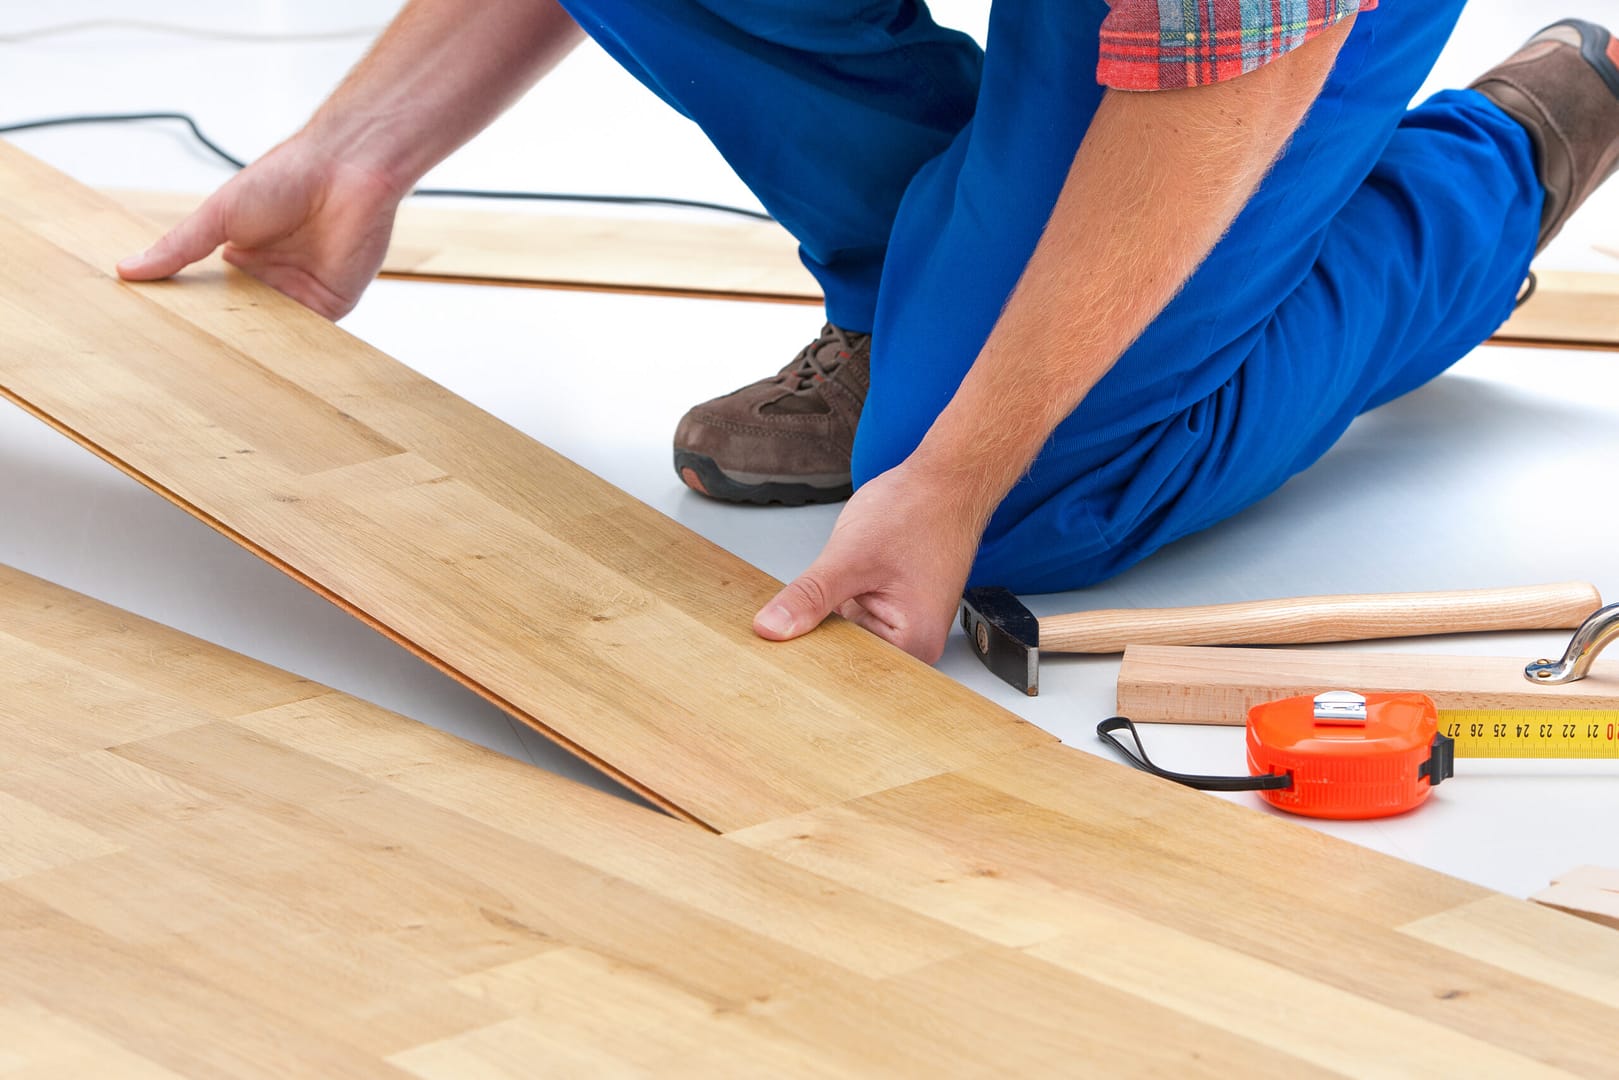 An installer works with hardwood flooring - Local Splash can help you showcase your expertise in using top-quality materials to create beautiful and long-lasting flooring solutions